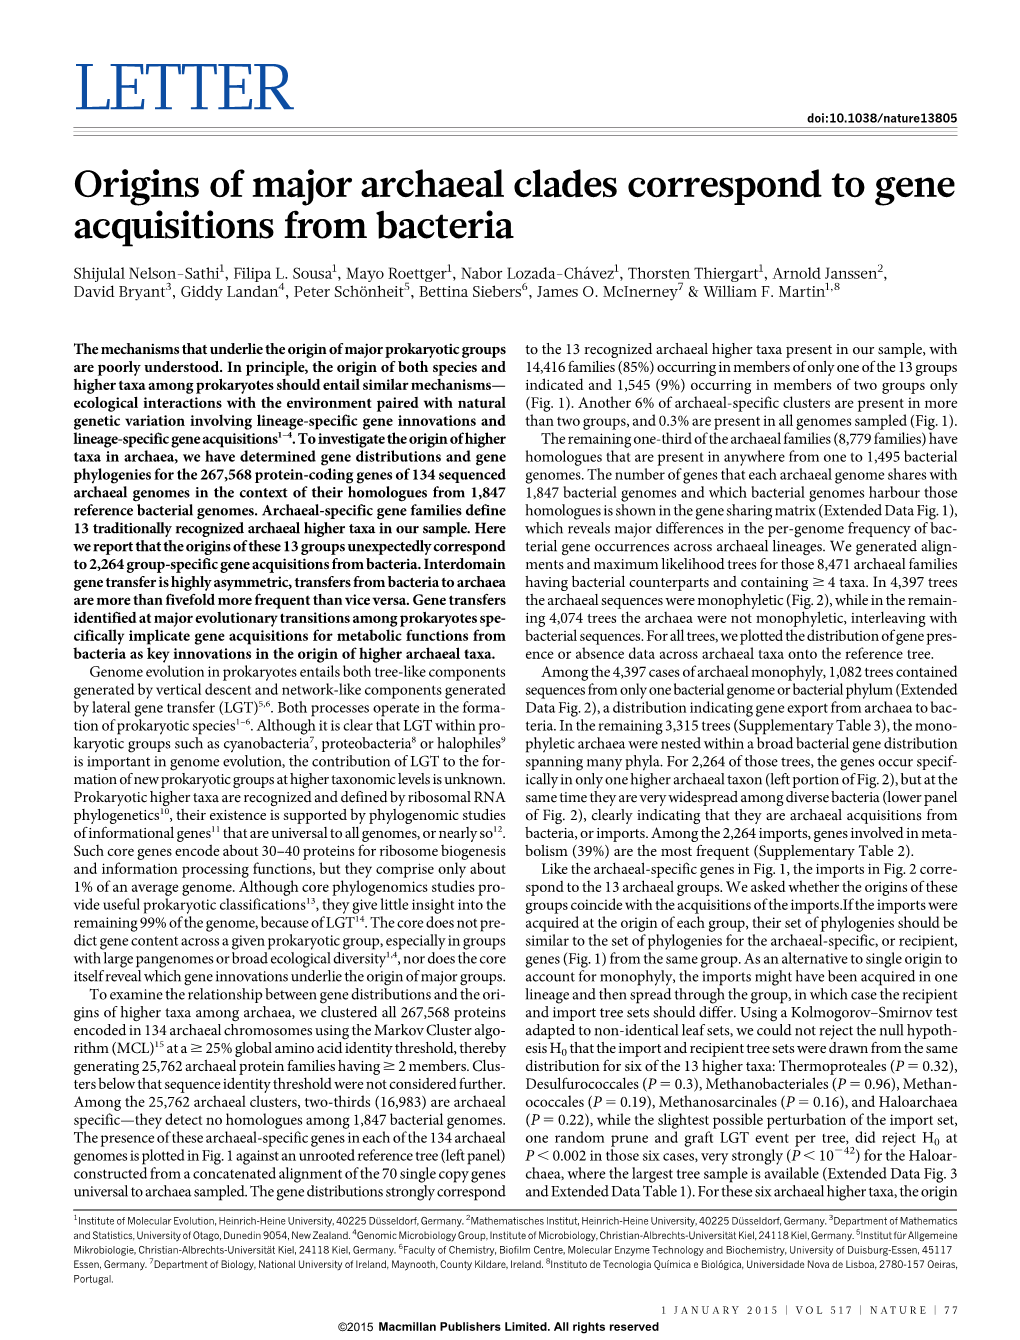 Origins of Major Archaeal Clades Correspond to Gene Acquisitions from Bacteria